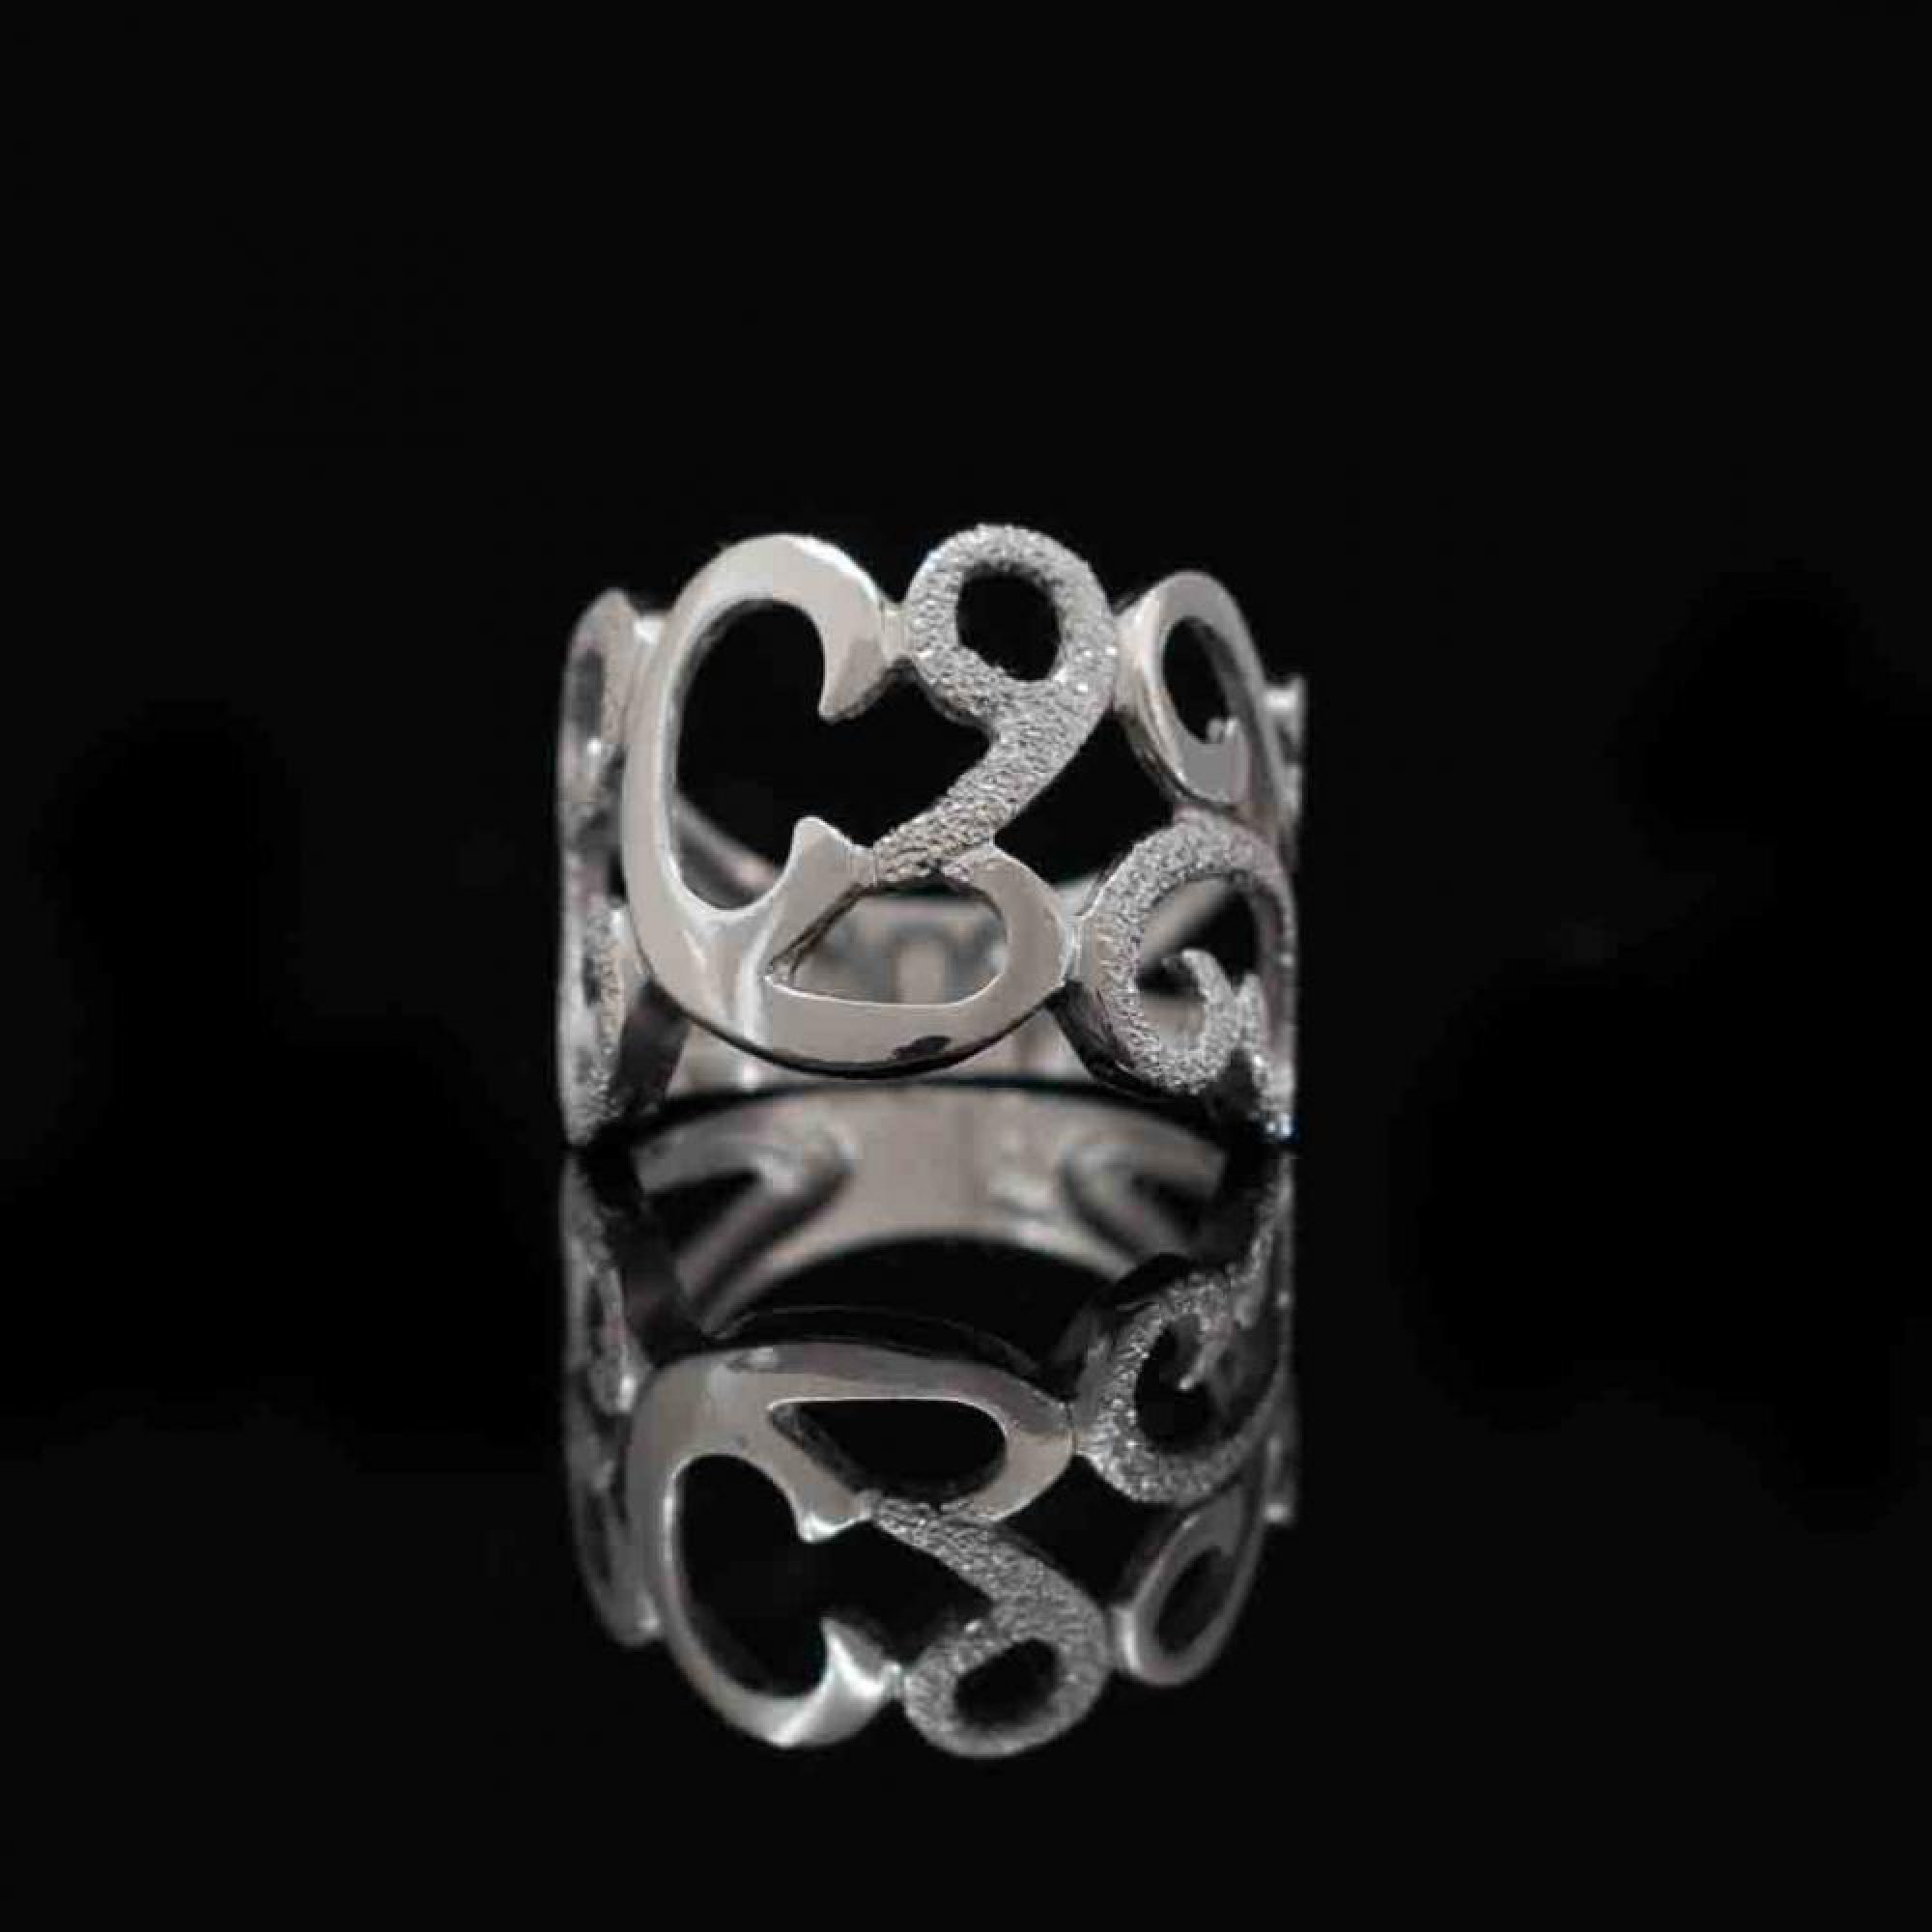 Limited edition handmade ring